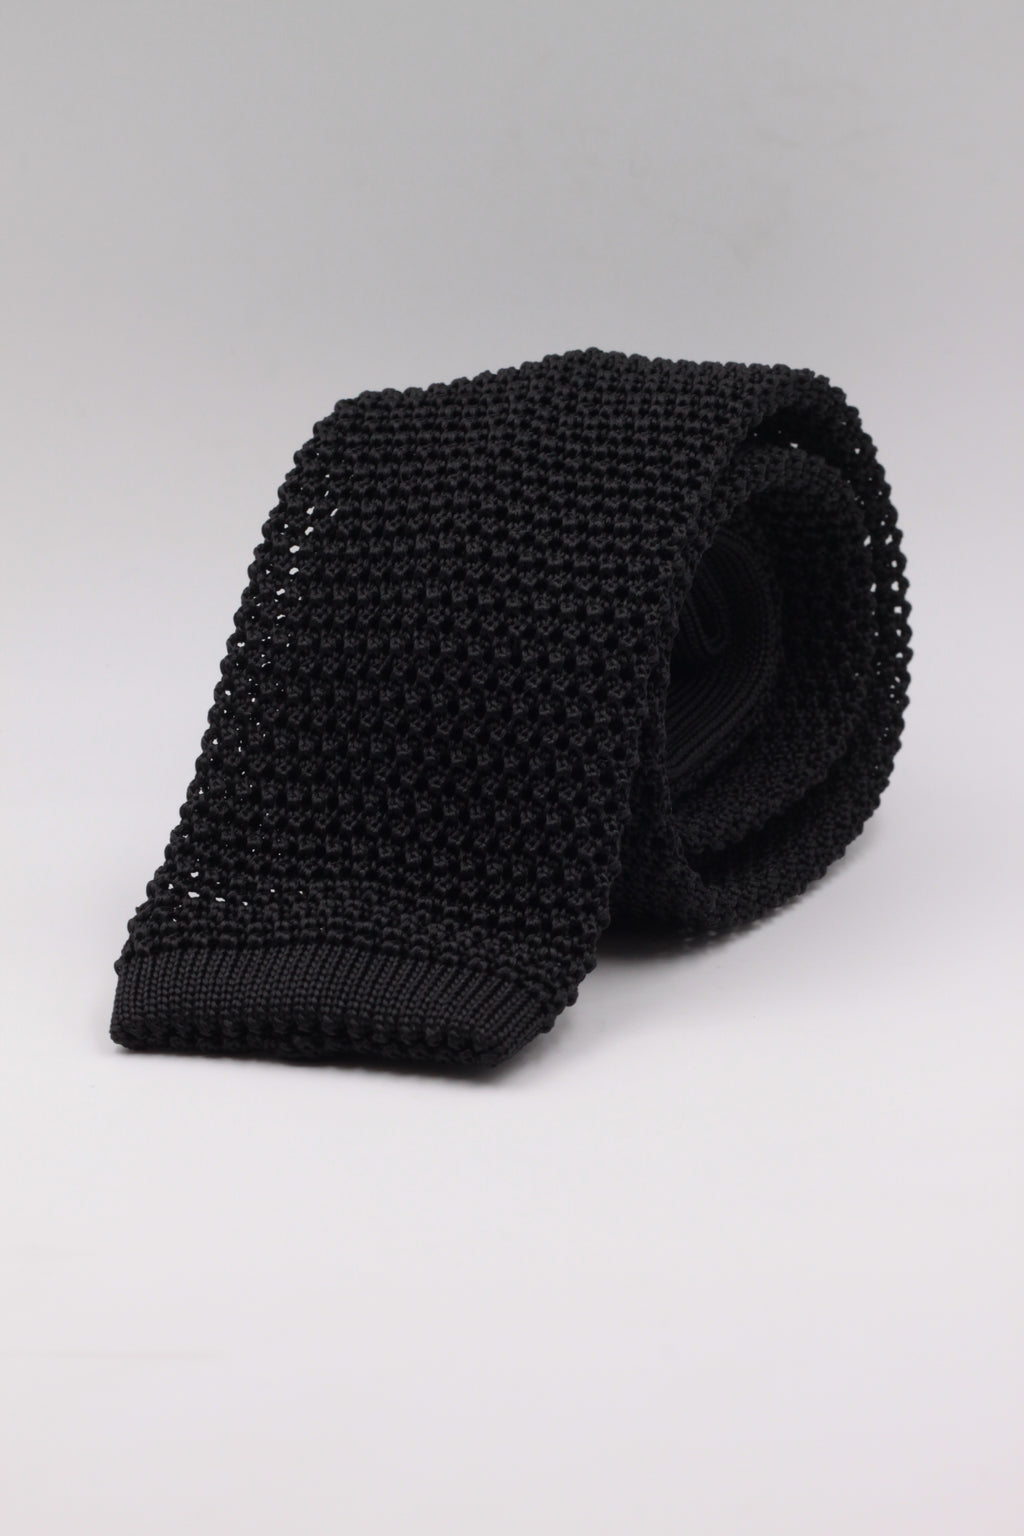 Black knitted tie